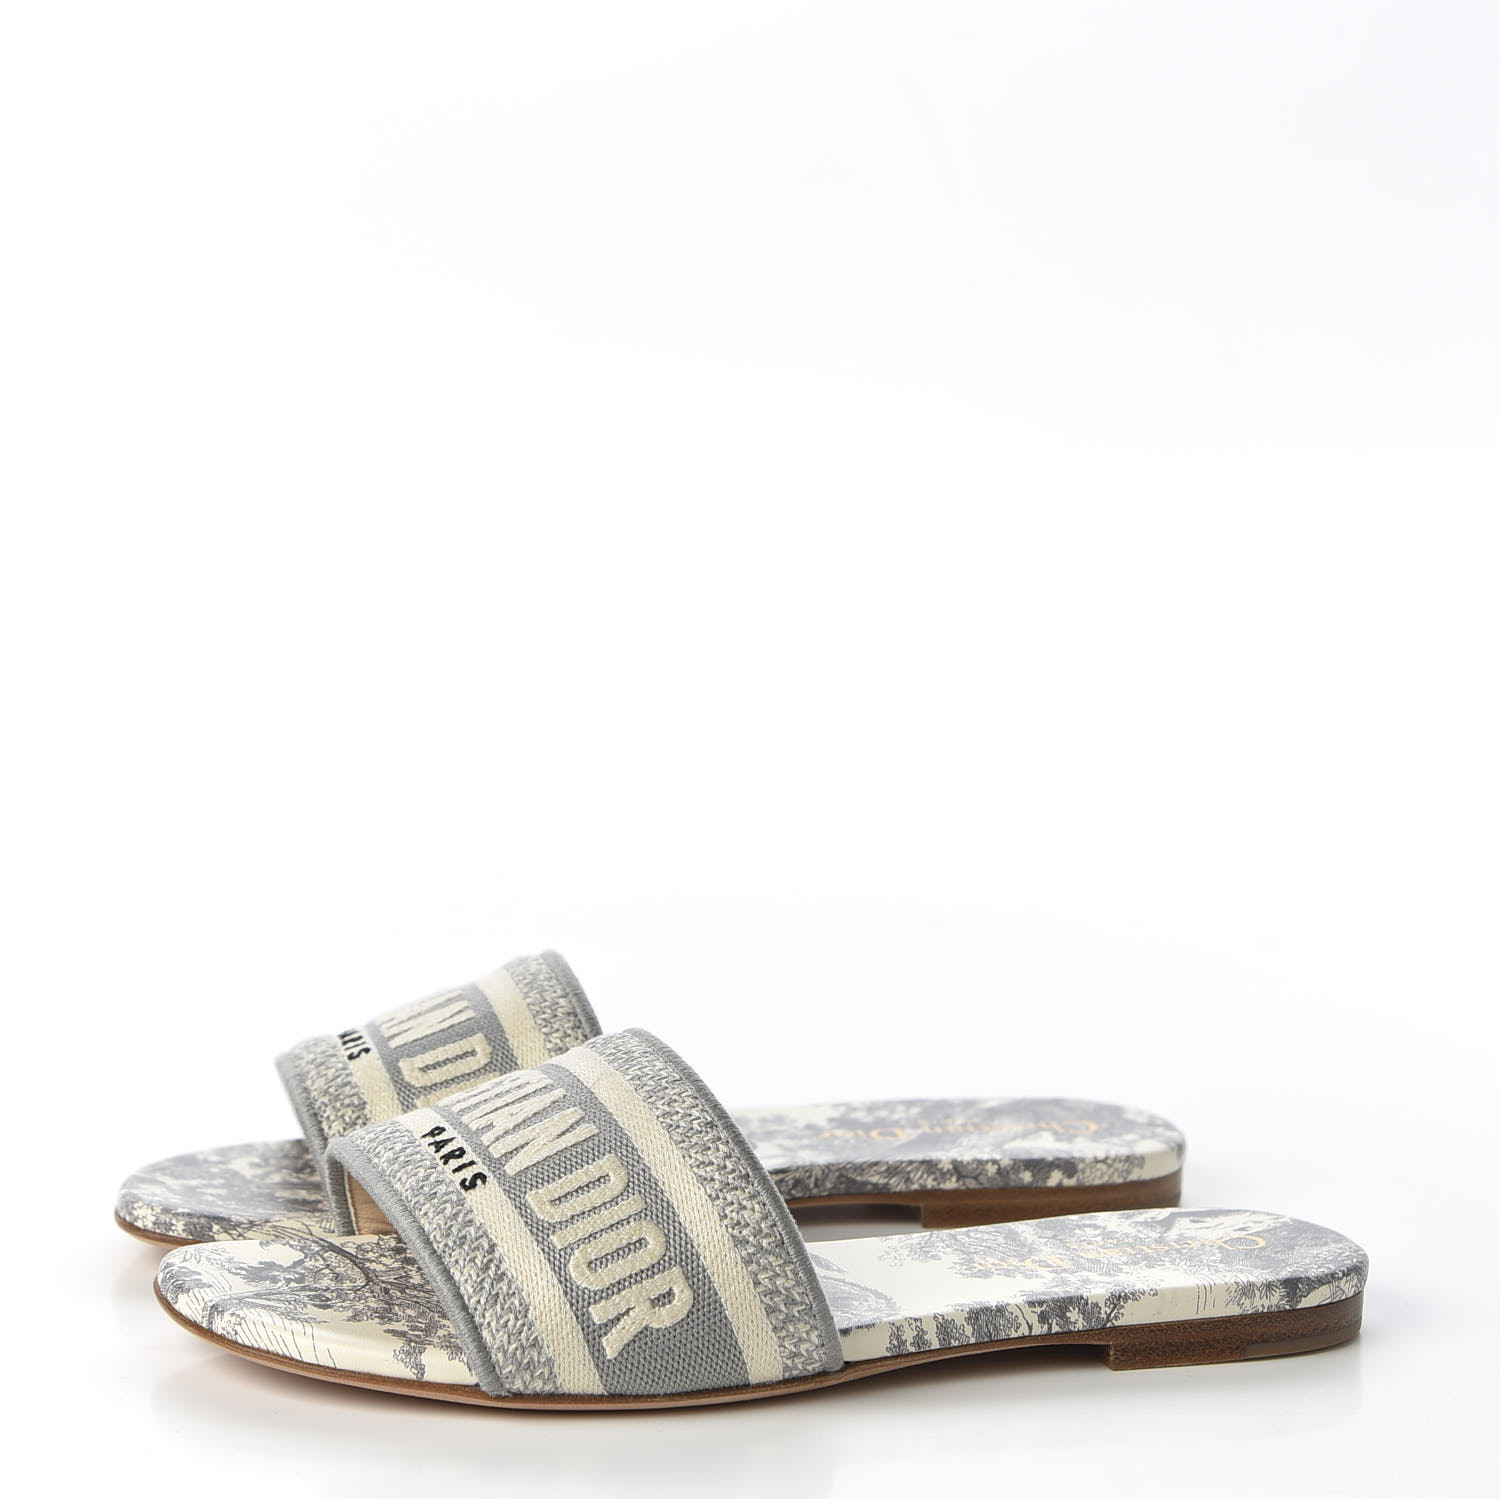 CHRISTIAN DIOR Canvas Embroidered Dway Mules Slide Sandals 36 Grey ...